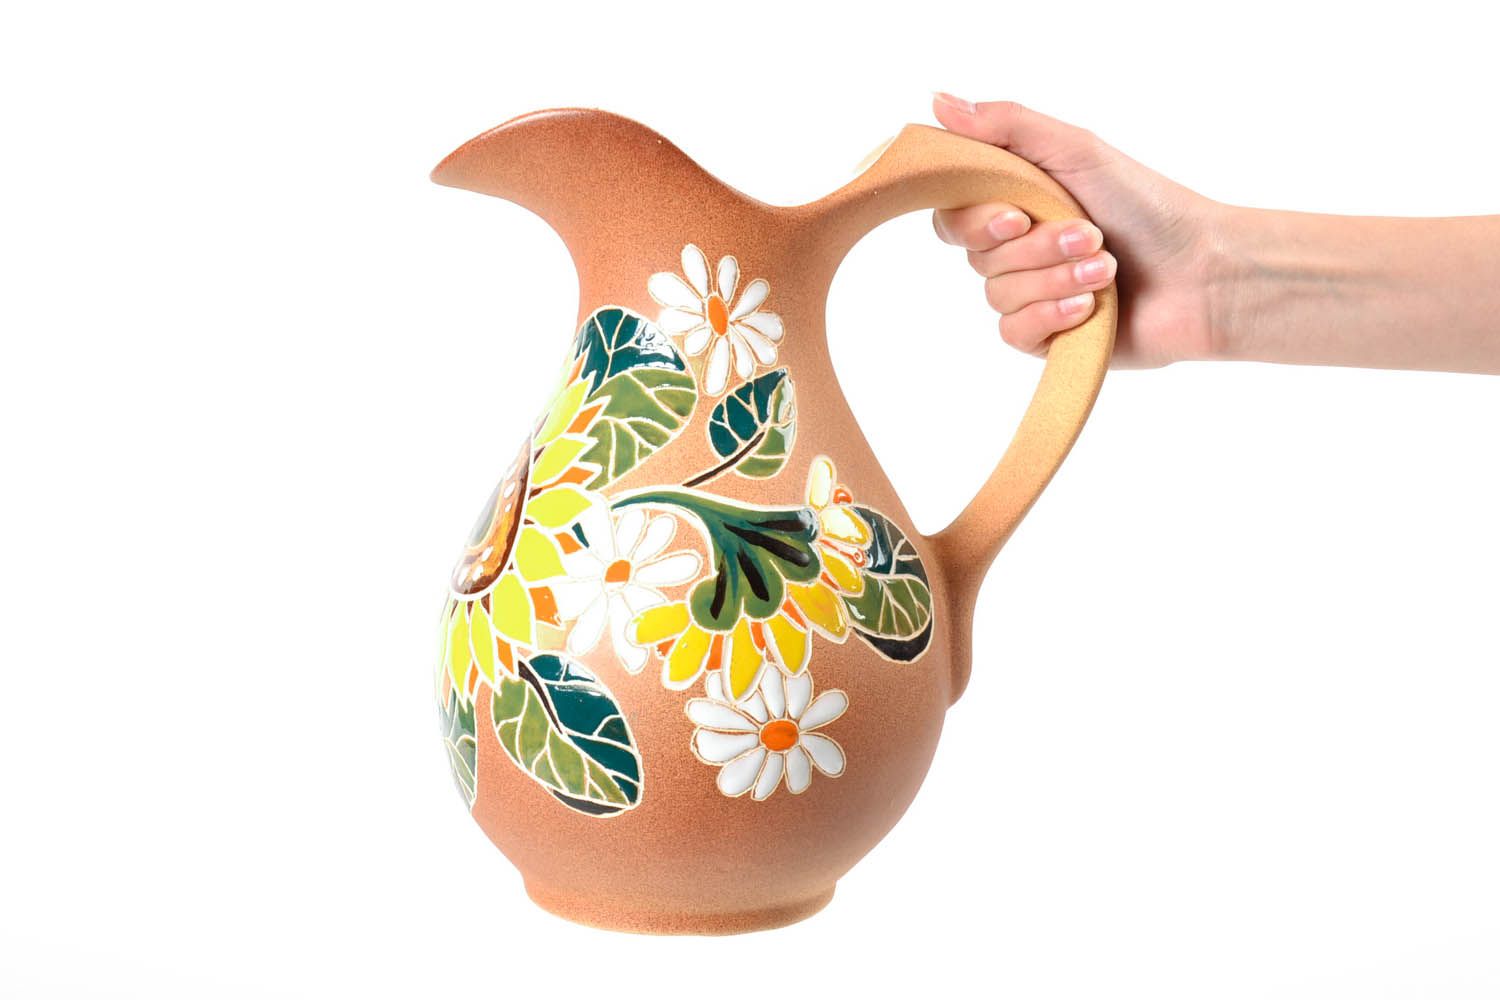 100 oz ceramic water pitcher with handle and floral design in beige, yellow, green colors 4 lb photo 2